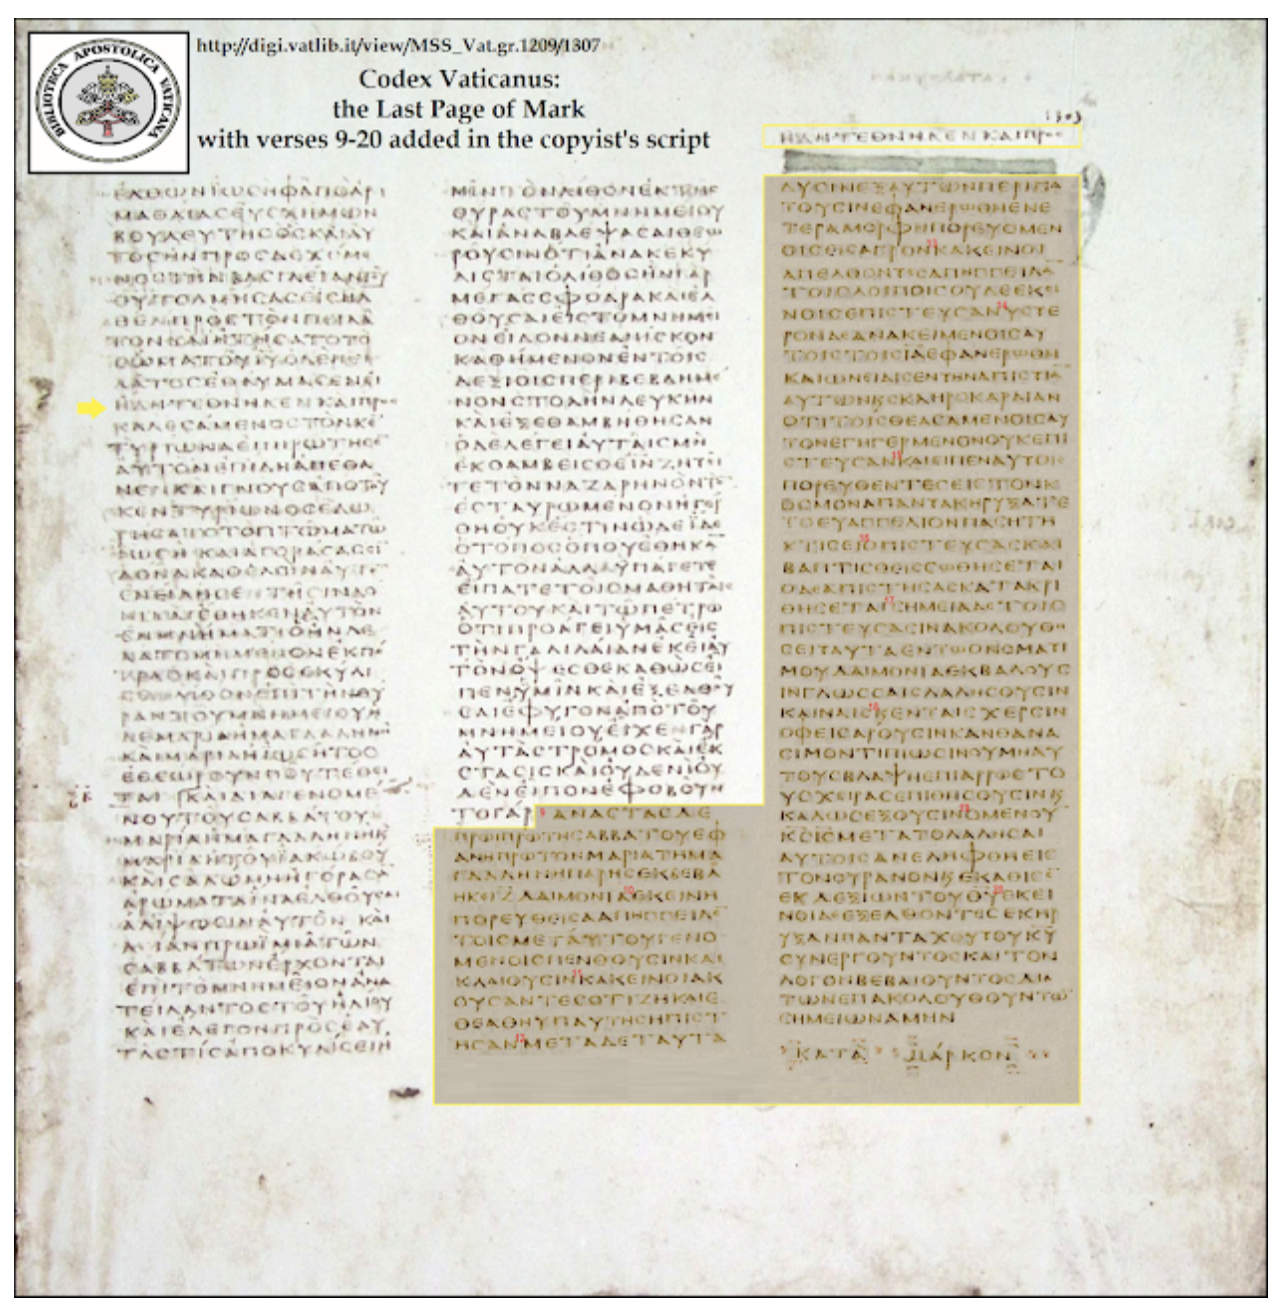 James Snapp's cut-and-paste tecnique for inserting the longer ending of Mark into the space on Vaticanus